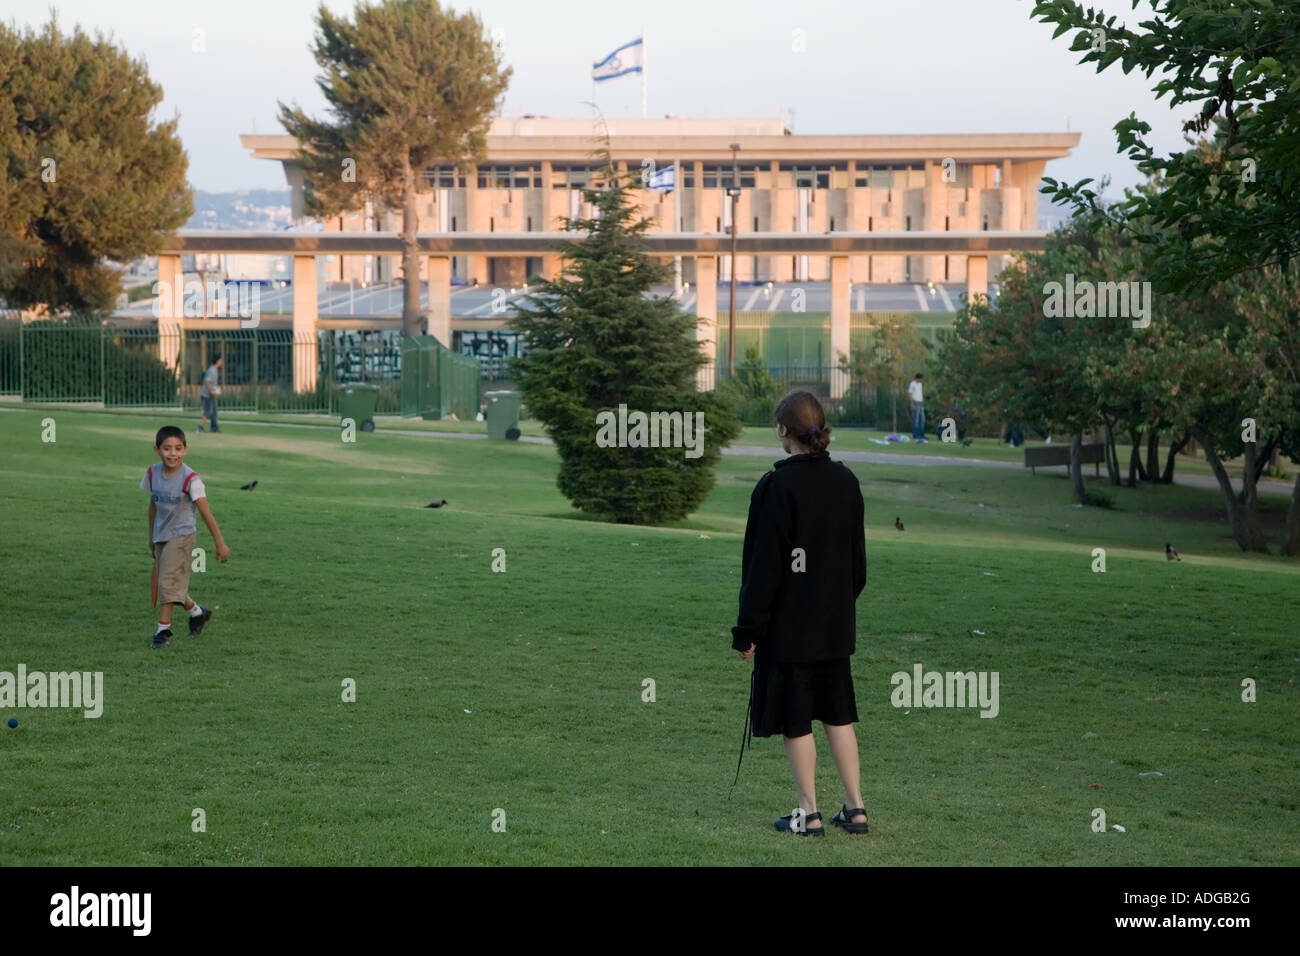 Stock photo of a mother and child playing in the Wohl Garden opposite the Israeli Knesset in Jerusalem Shot July 2007 Stock Photo